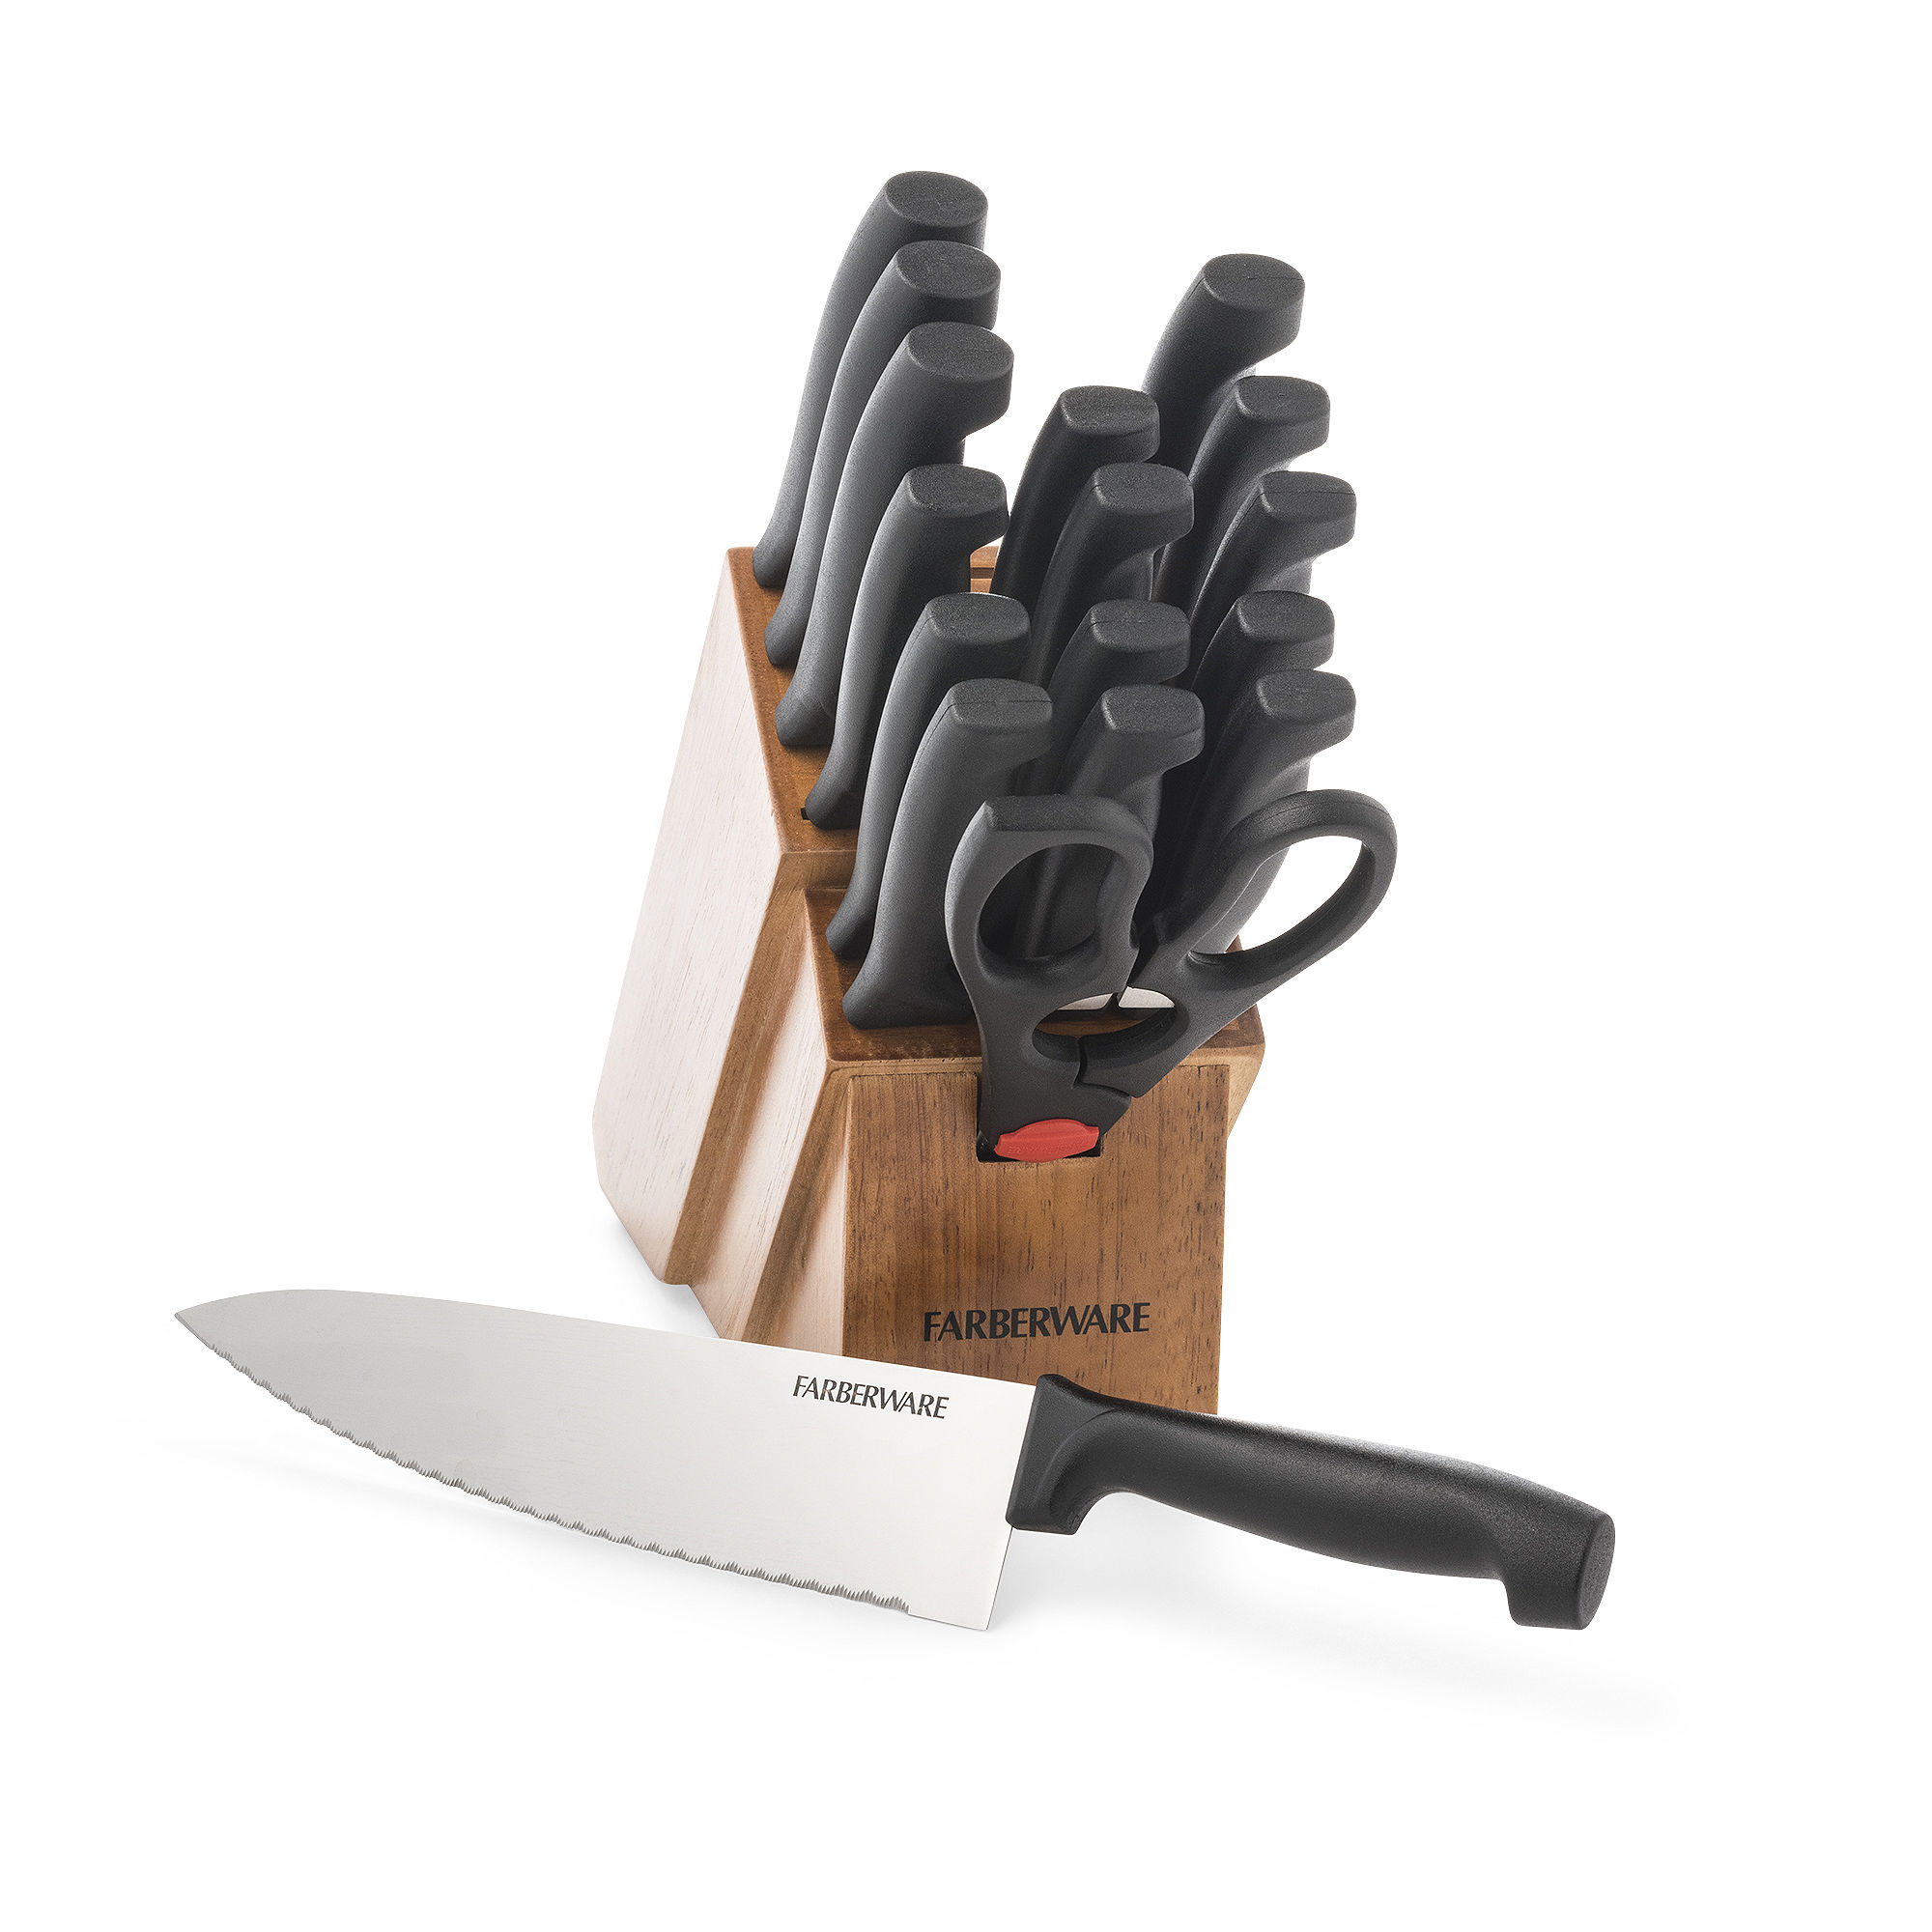 Farberware 18-Piece Never Needs Sharpening Stainless Steel Knife Set with Block Natural Wood - image 3 of 16